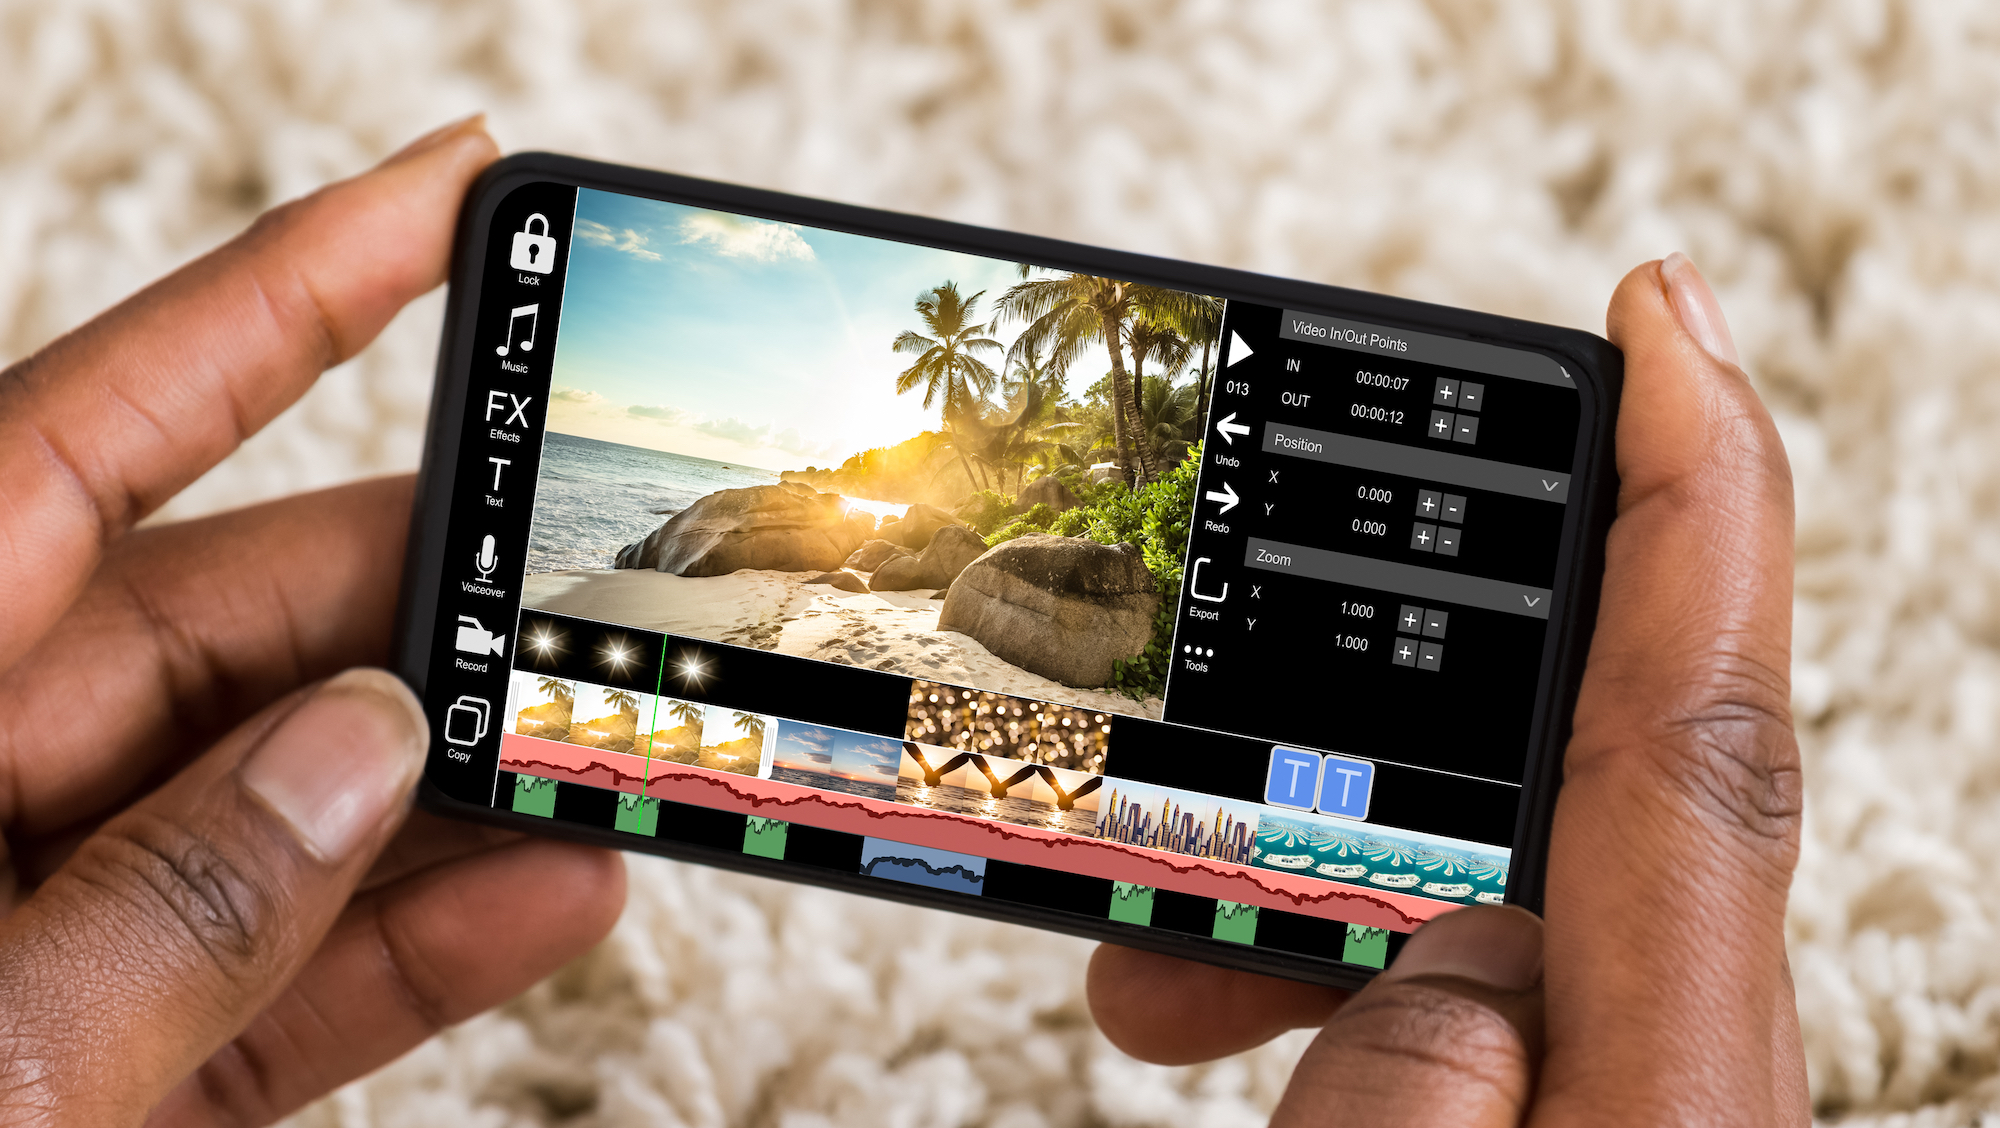 Top 10 Mobile Editing Apps for Creating Stunning Photos and Videos